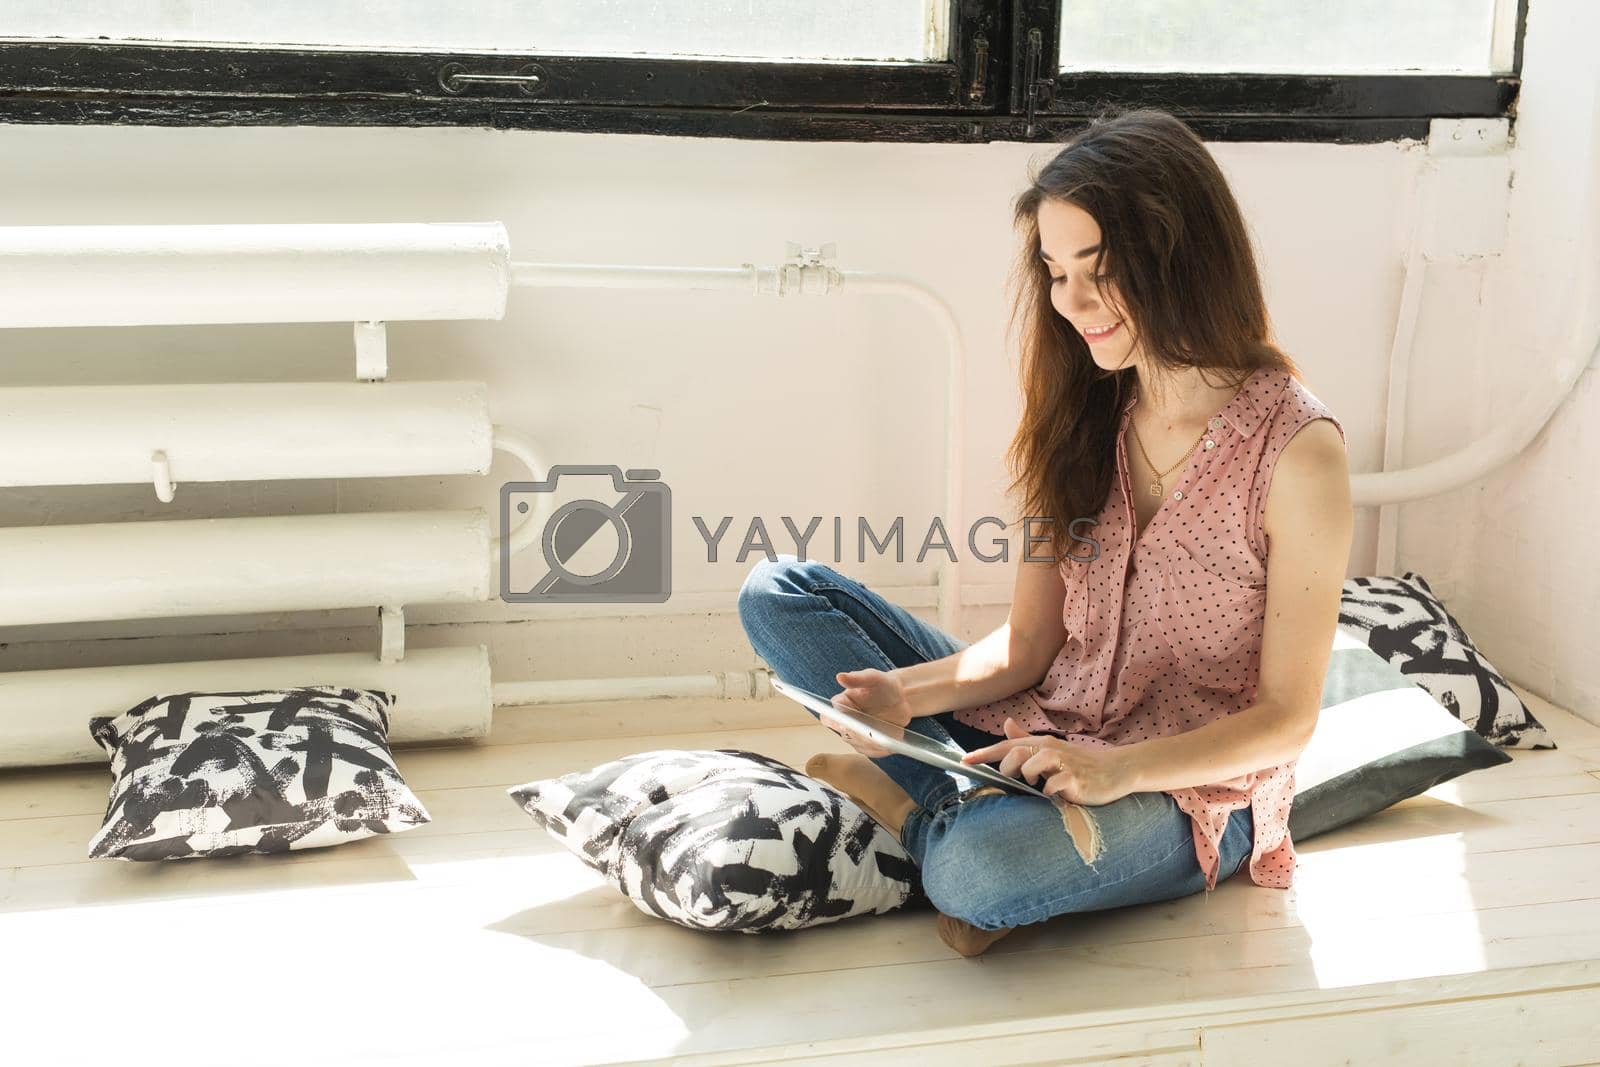 Royalty free image of Leisure, technology and people concept - young brunette woman using tablet at home by Satura86